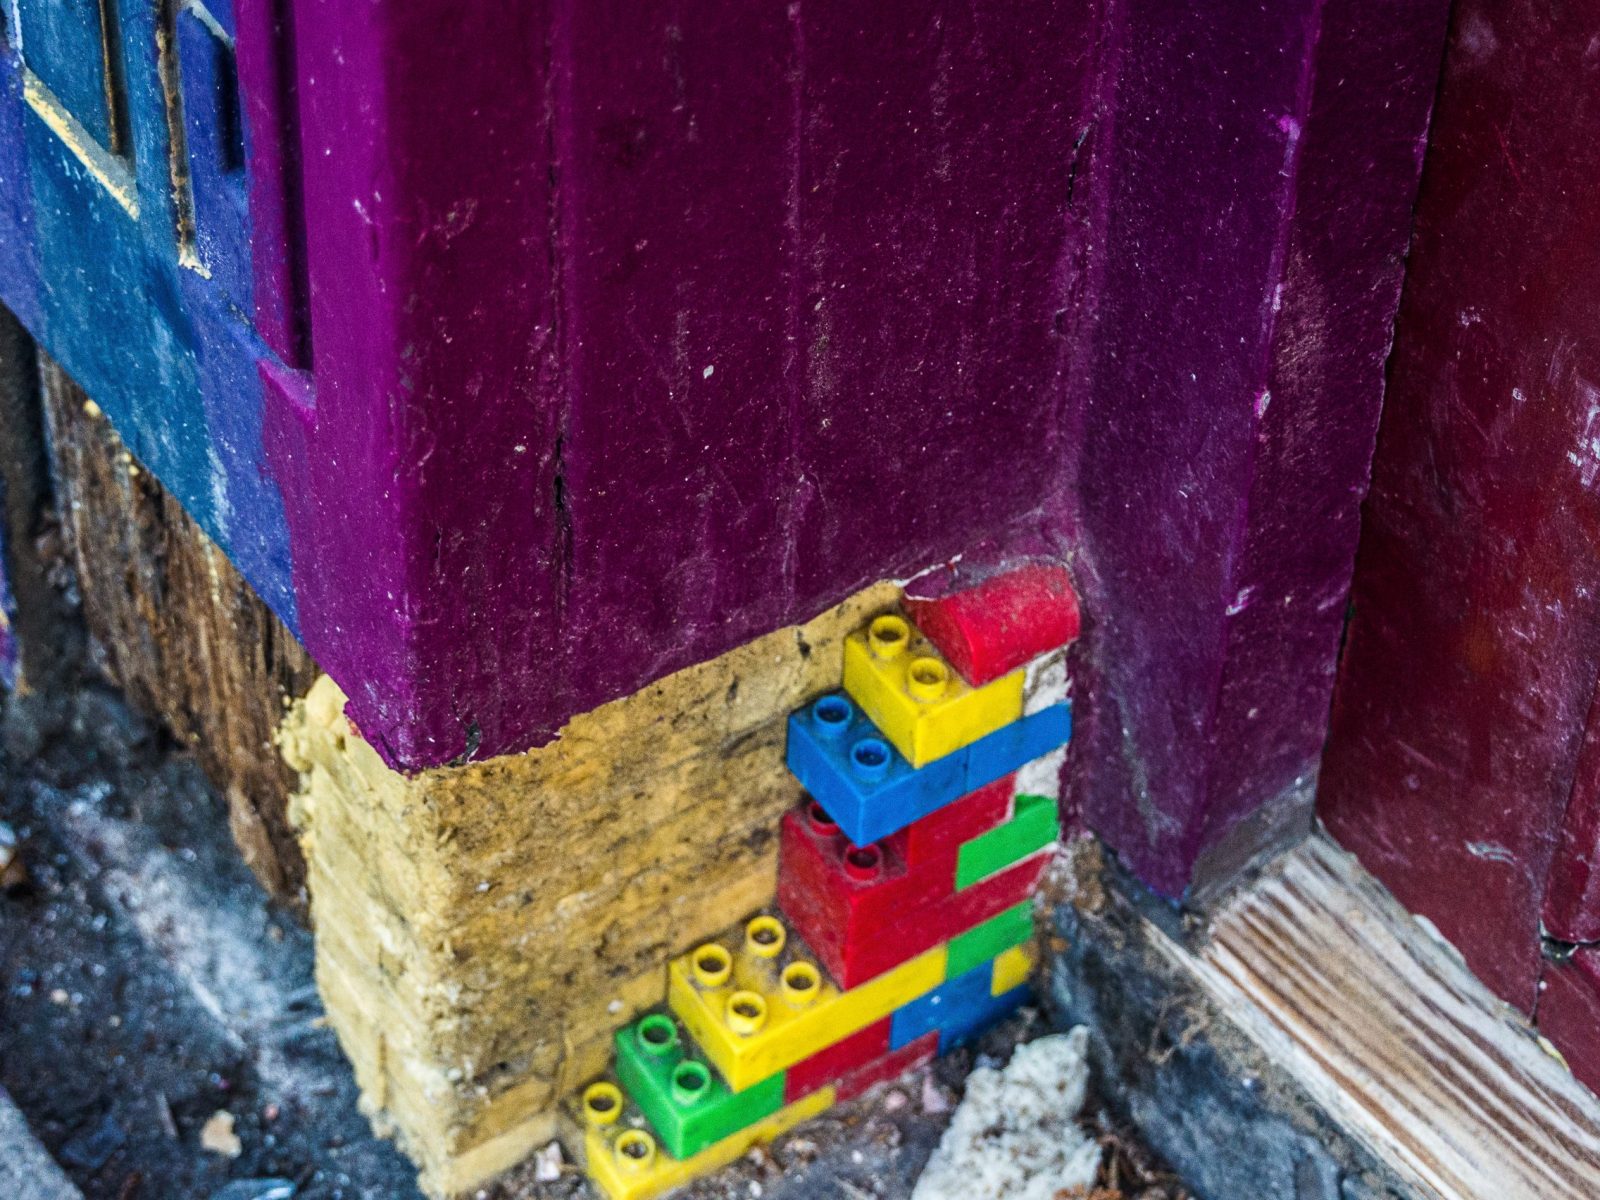 DID SOMEONE USE LEGO BRICKS TO REPAIR A WALL [OR WAS IT A FORM OF URBAN ART] 003